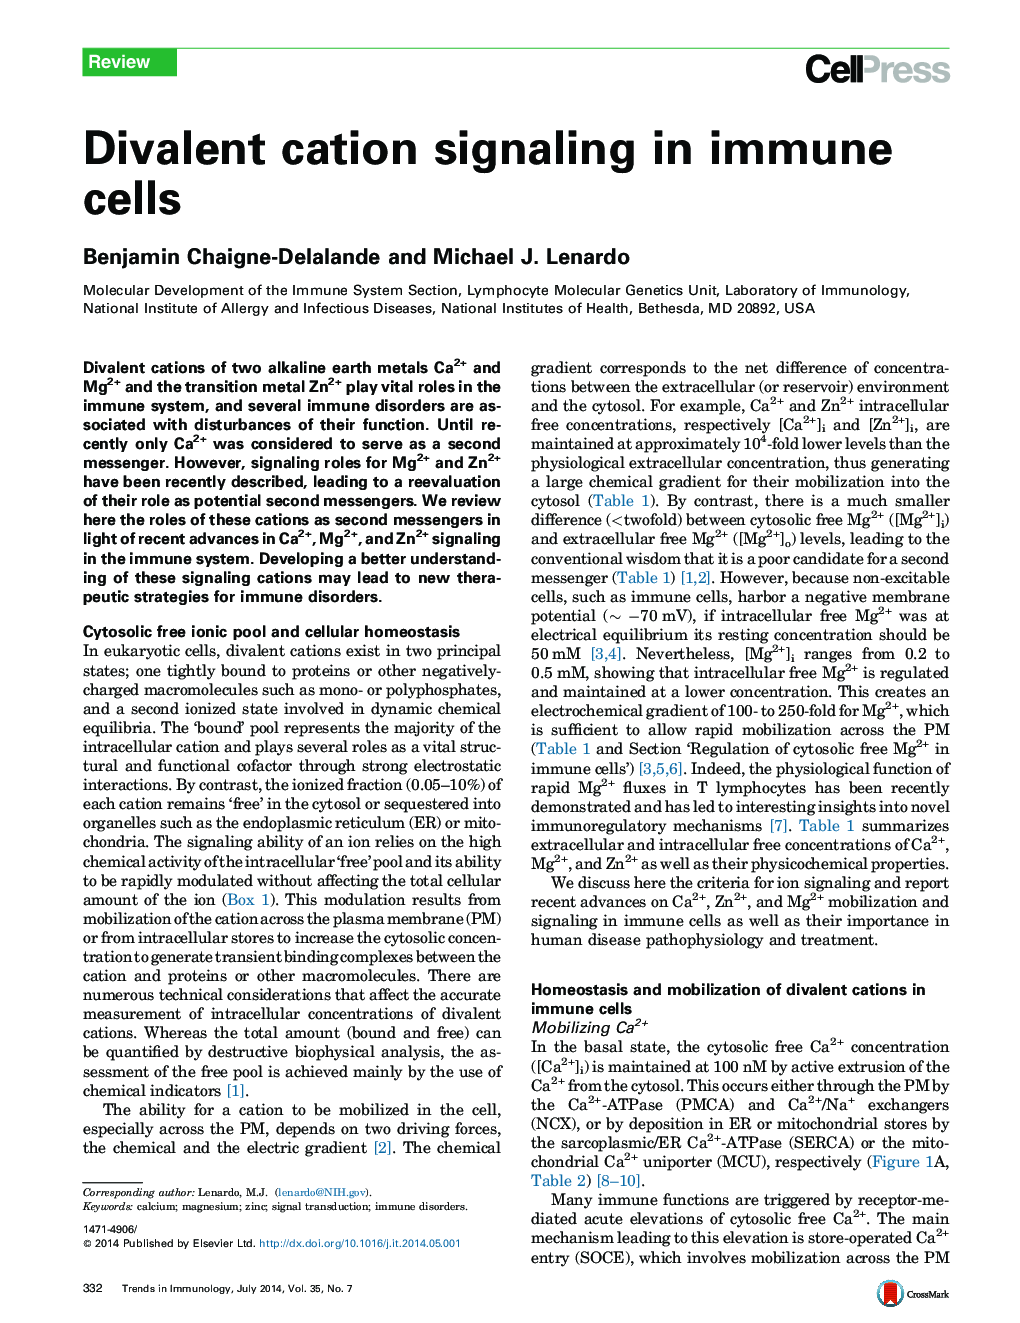 Divalent cation signaling in immune cells